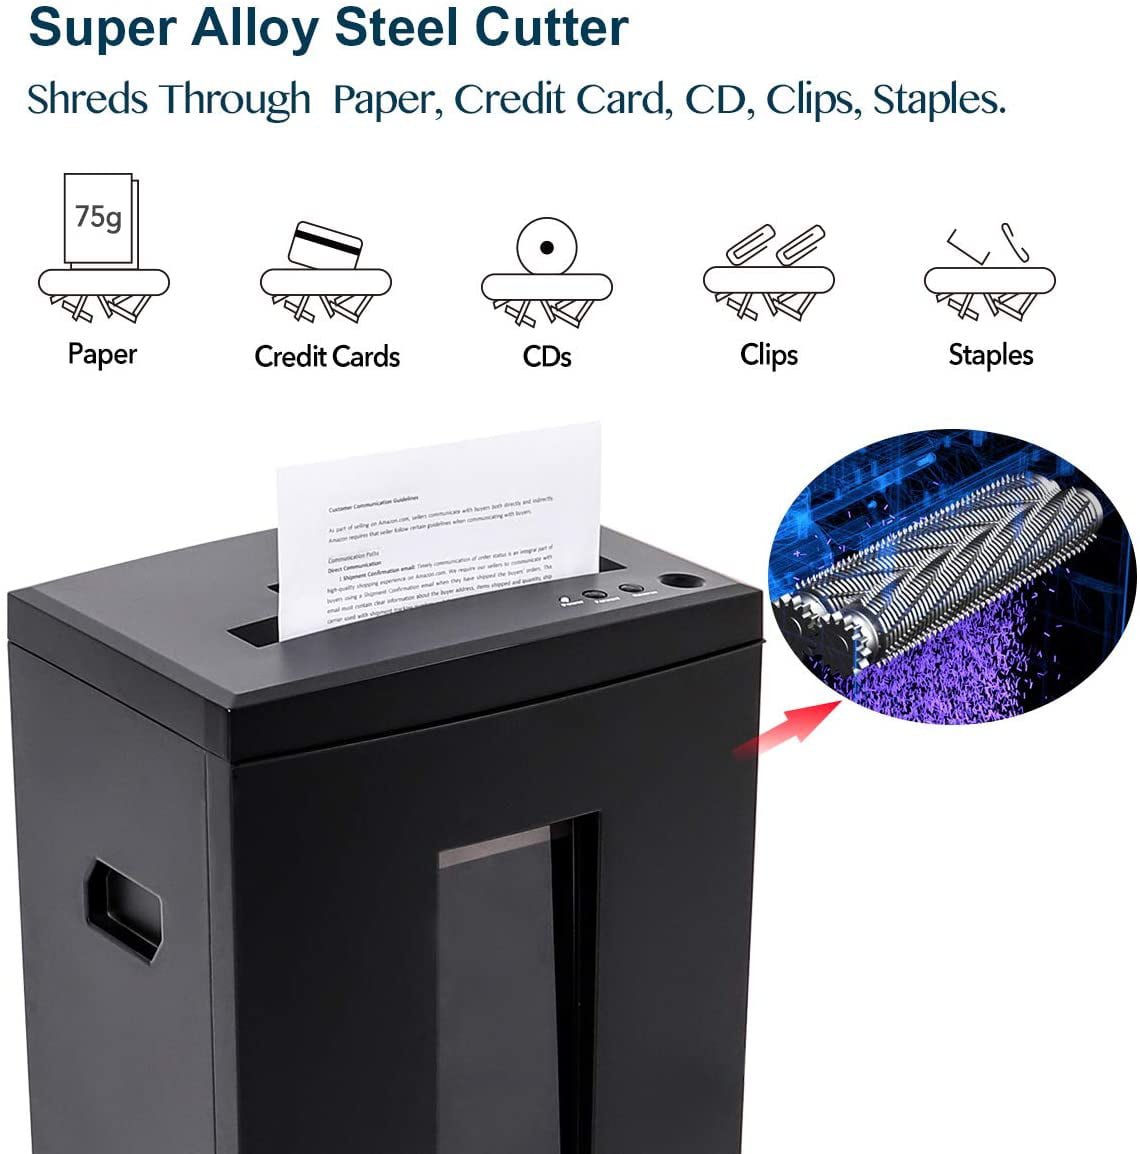 WOLVERINE 18-Sheet 60 Mins Running Time Cross Cut High Security Level P-4 Heavy Duty Paper/CD/Card Ultra Quiet Shredder for Home Office with 22-Litre Pullout Waste Bin SD9113 Black